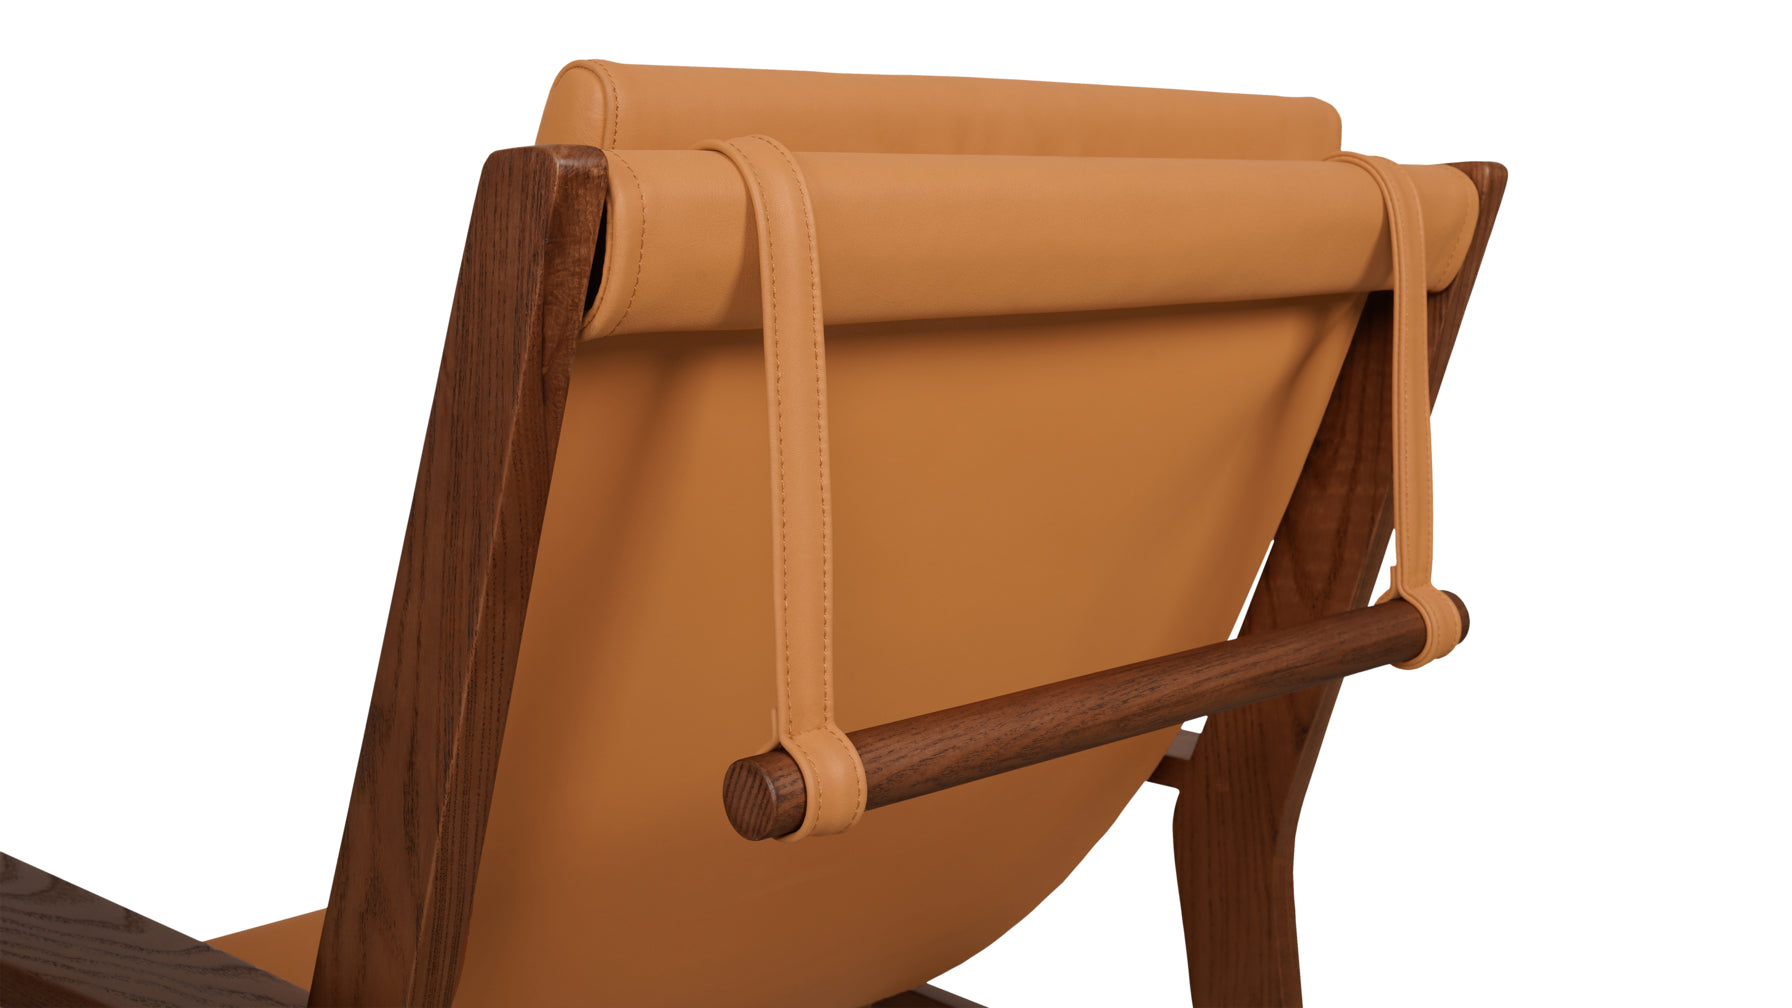 Sweet Life Sling Lounge Chair With Headrest, Terracotta Walnut - Image 8